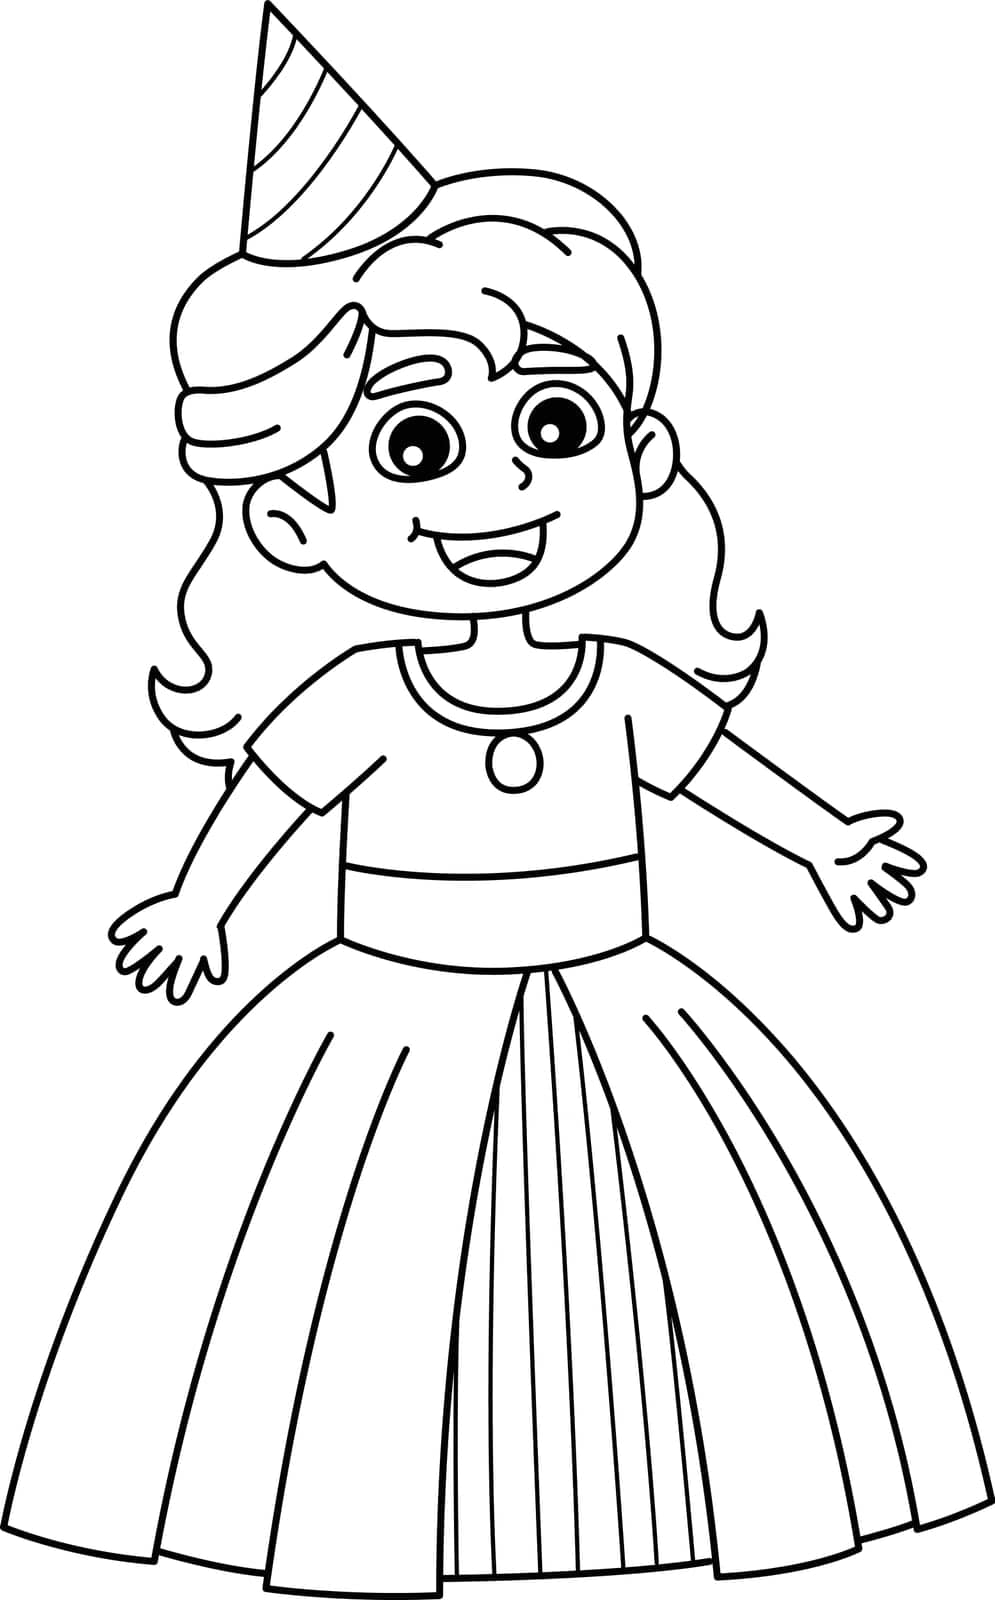 A cute and funny coloring page of a Happy Birthday Princess. Provides hours of coloring fun for children. Color, this page is very easy. Suitable for little kids and toddlers.